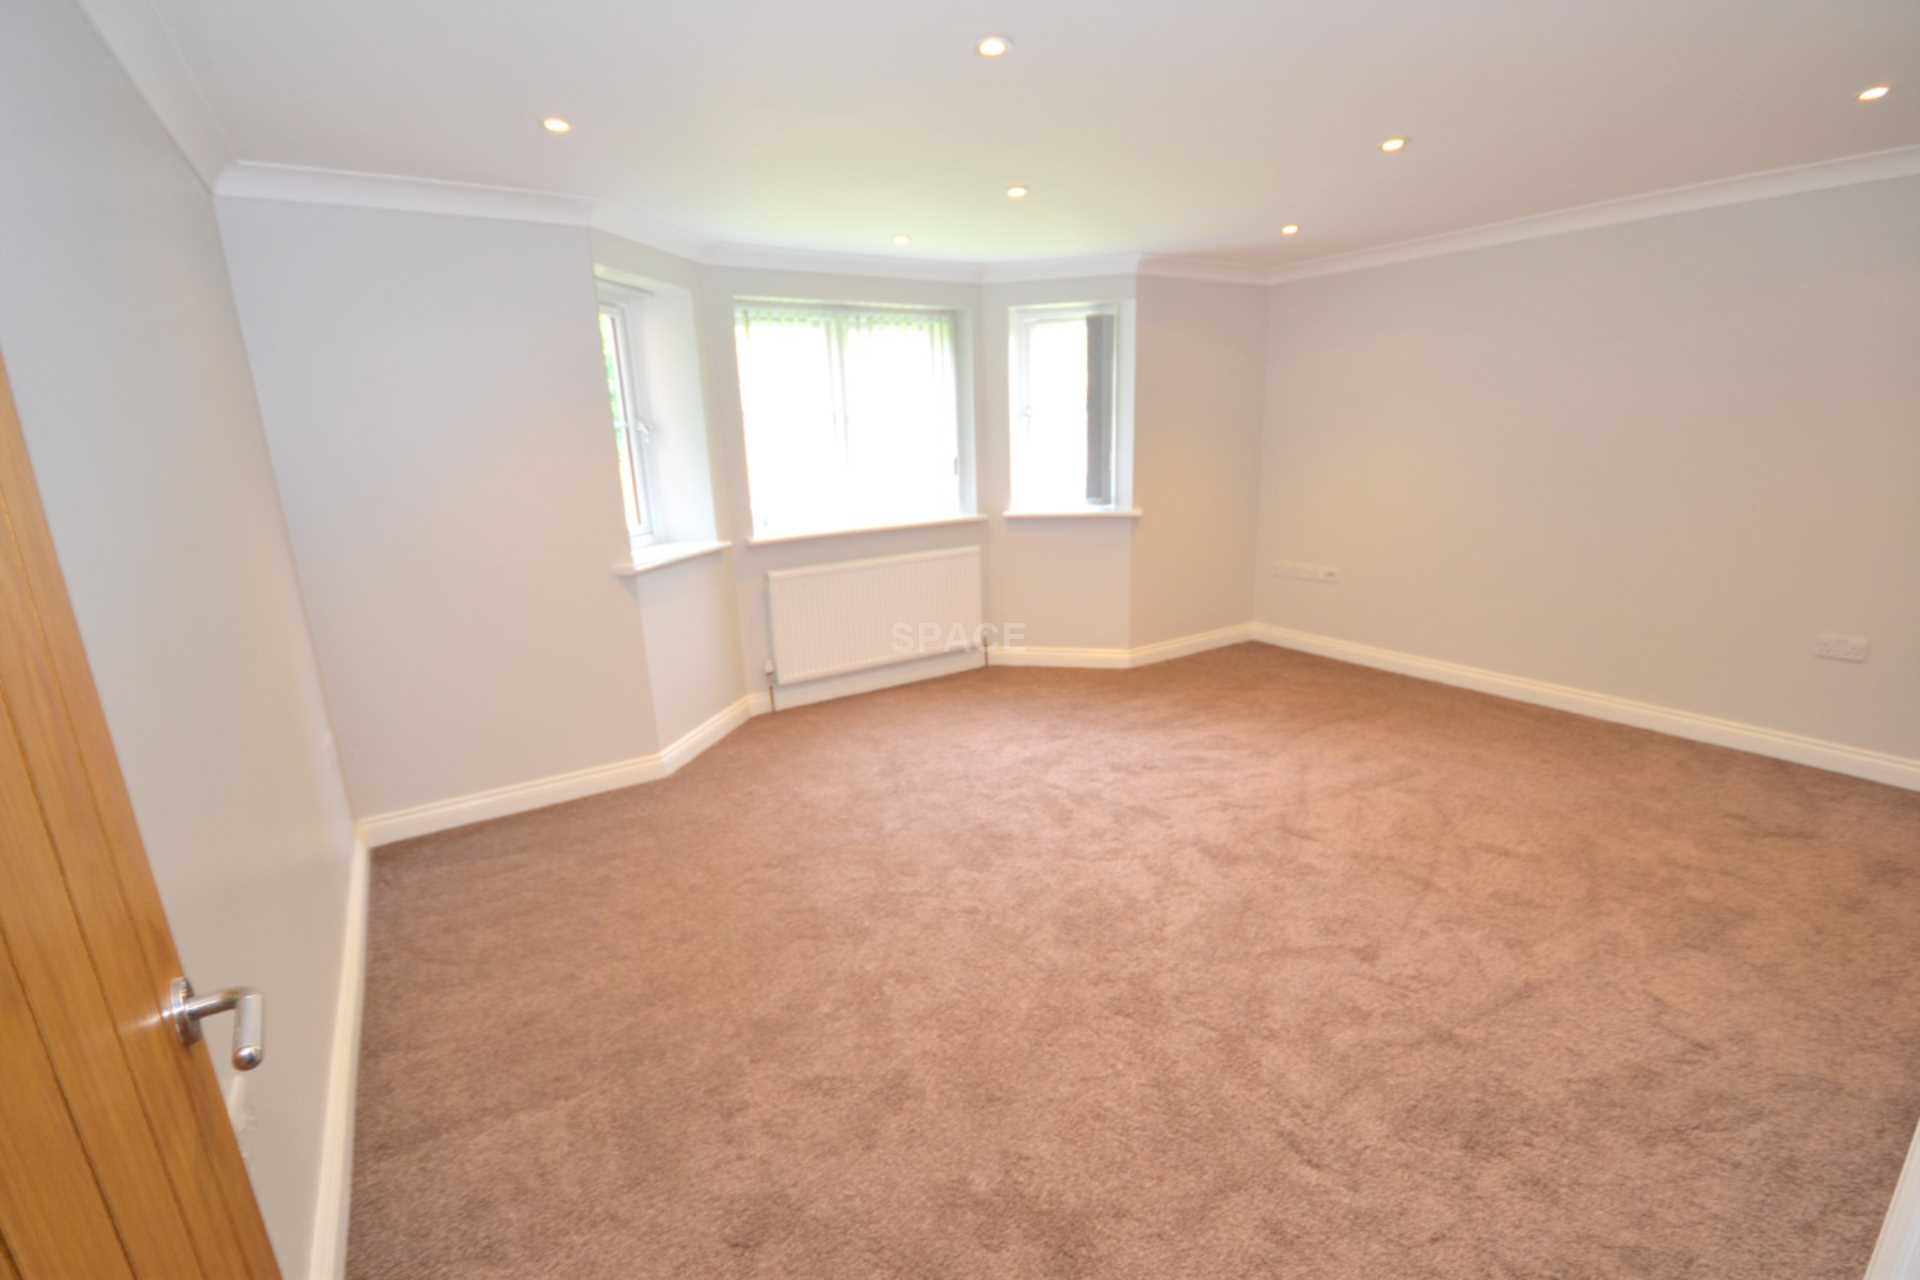 2 bed Flat for rent in Reading. From Space